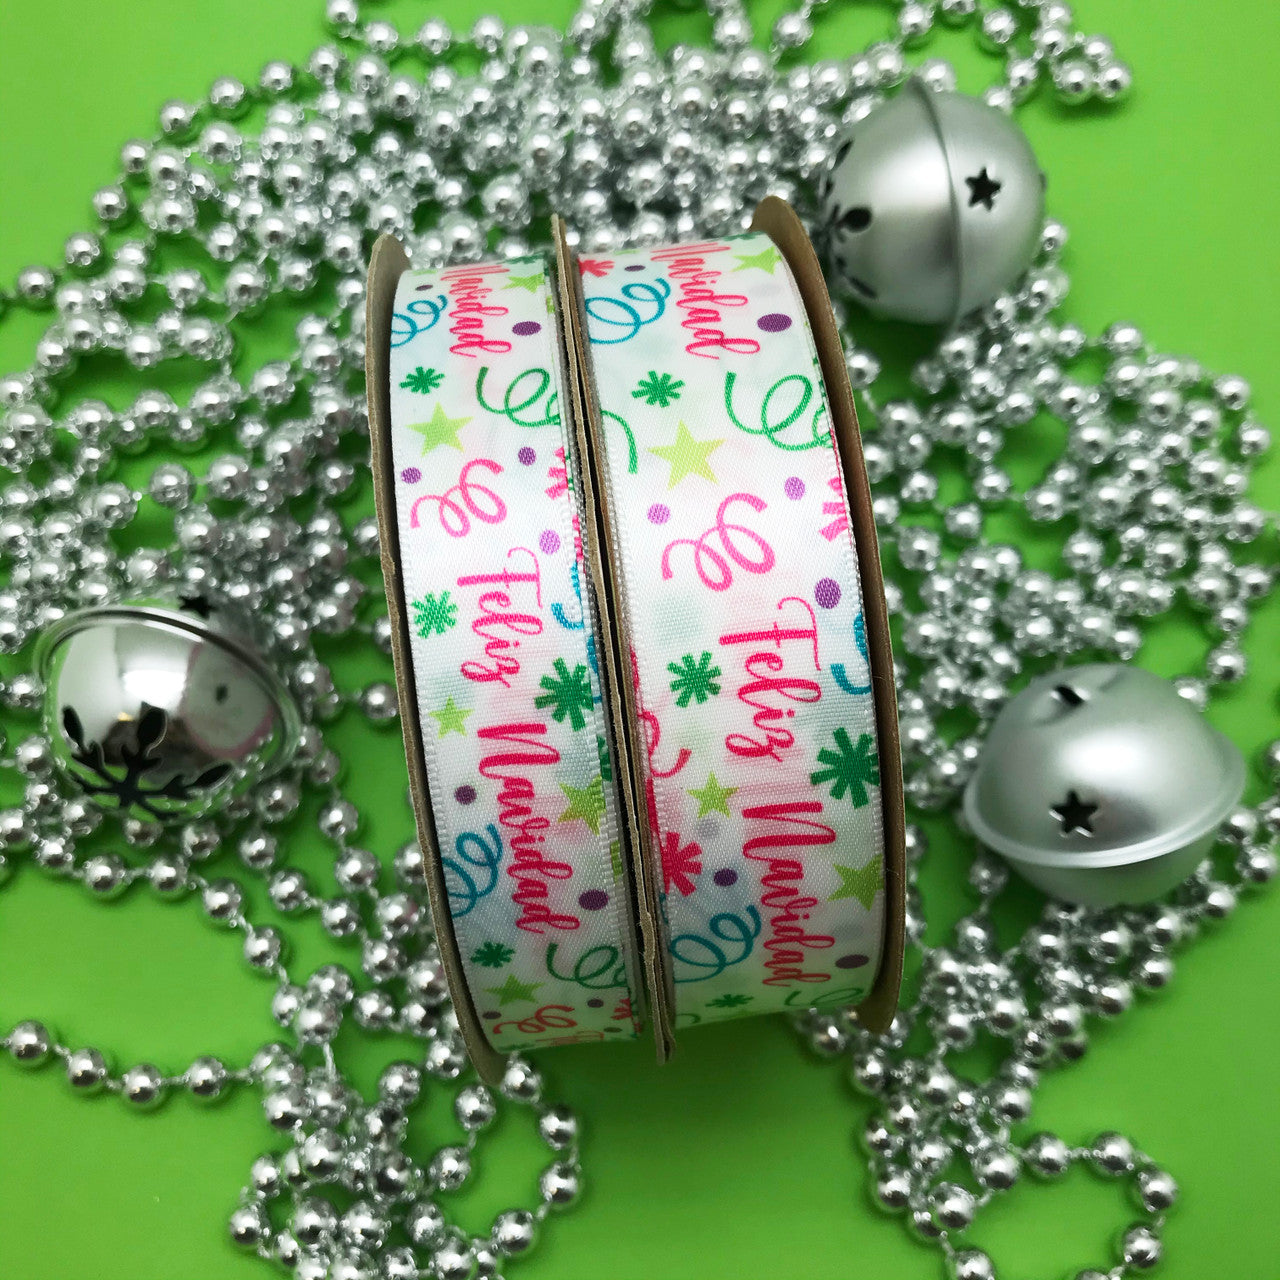 Our Feliz Navidad ribbon comes in 5/8" and 7.8" widths for all your decorating needs!